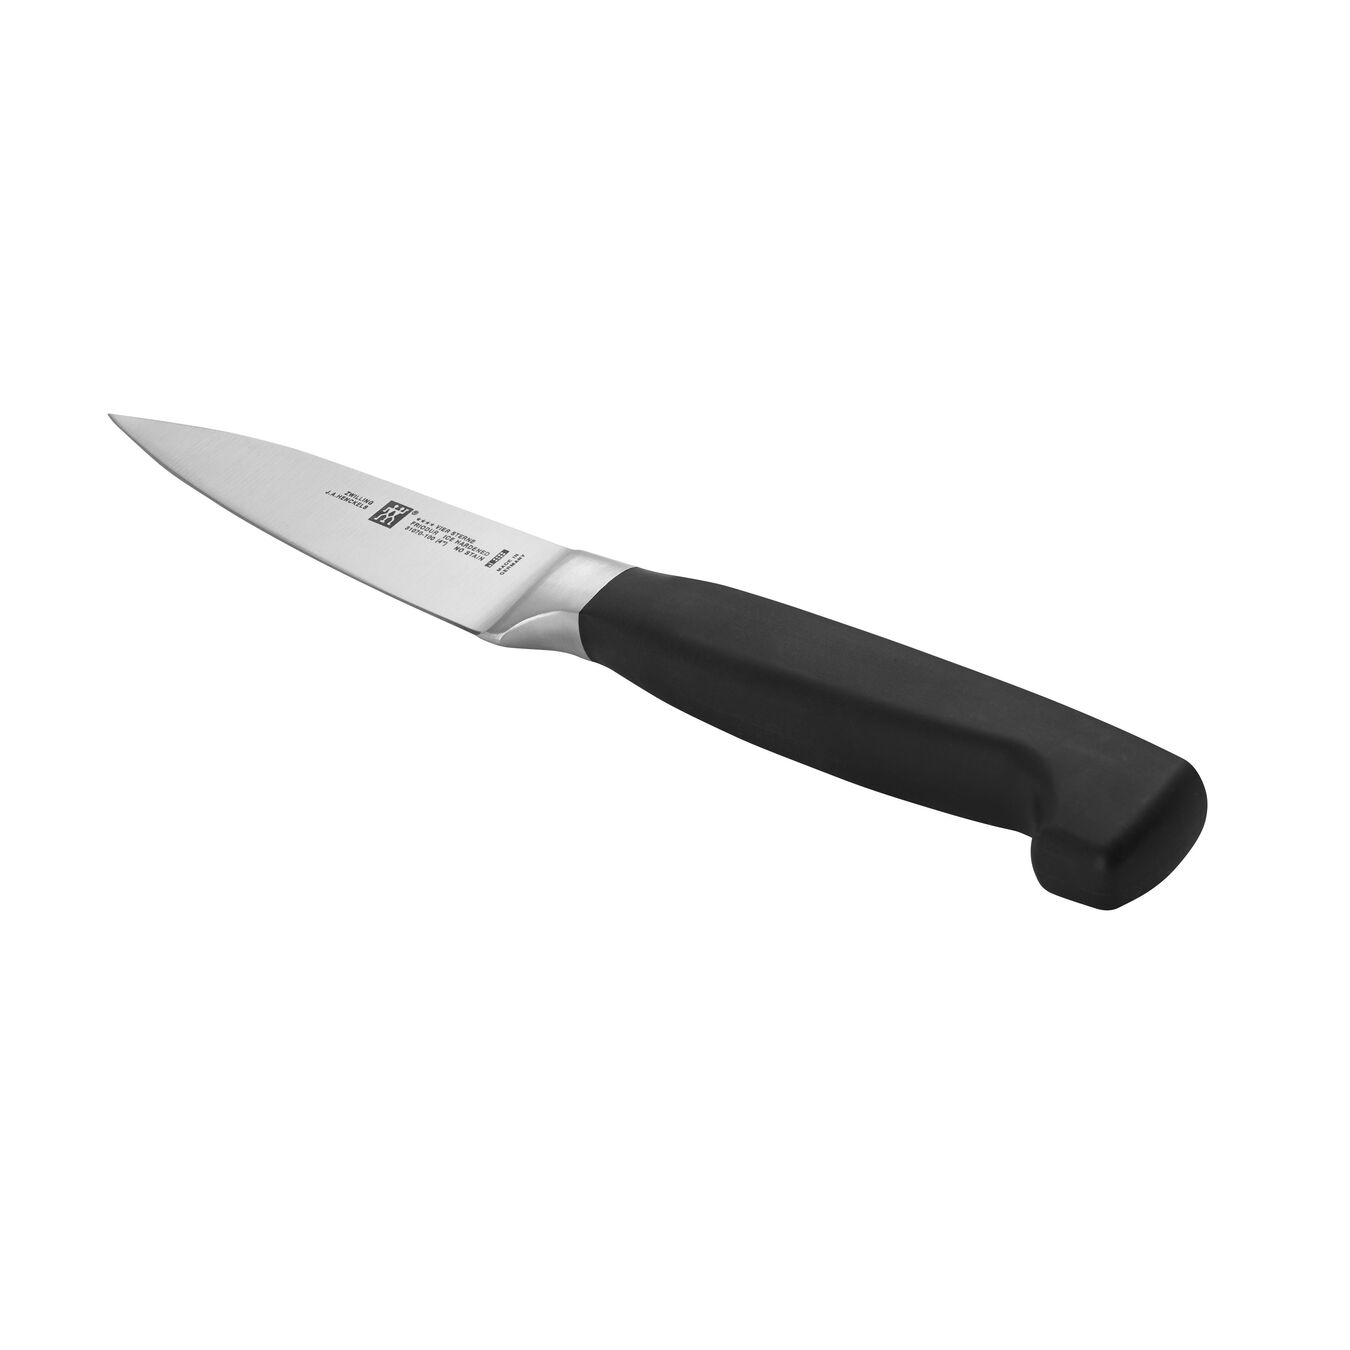 4-inch, Paring knife - Visual Imperfections,,large 3